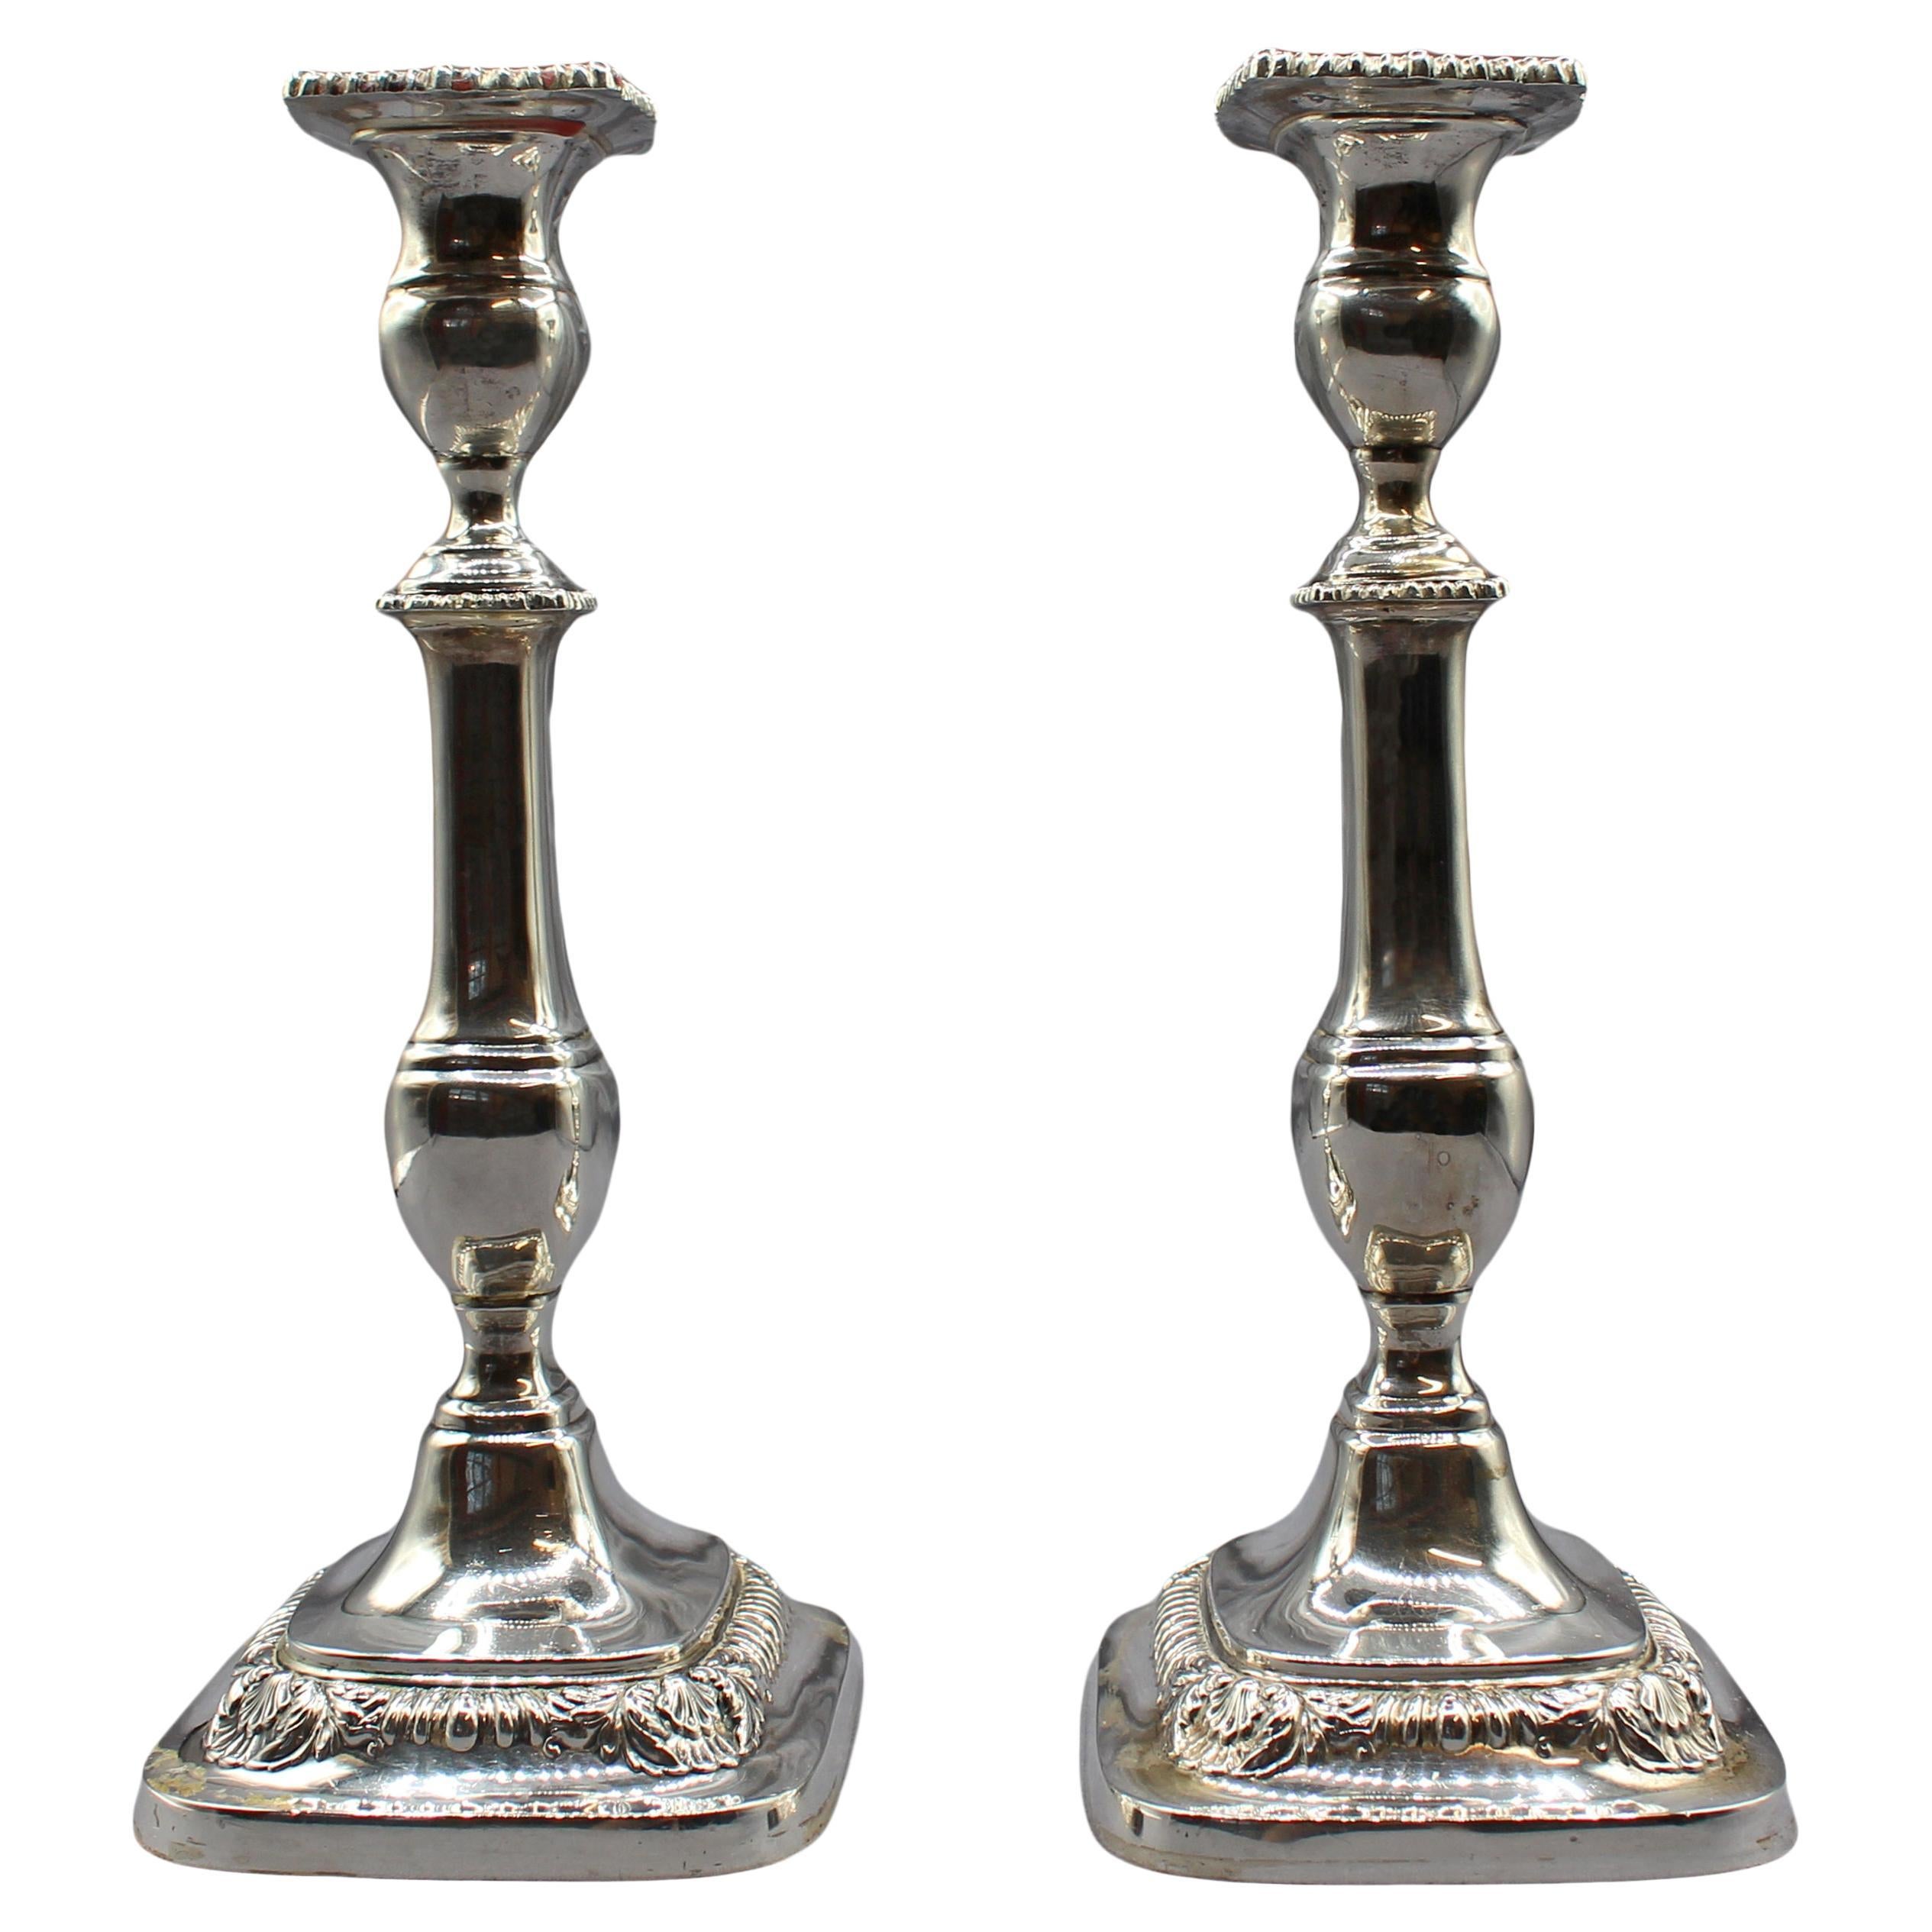 Pair of Mid-20th Century Sterling Silver Candlesticks by International